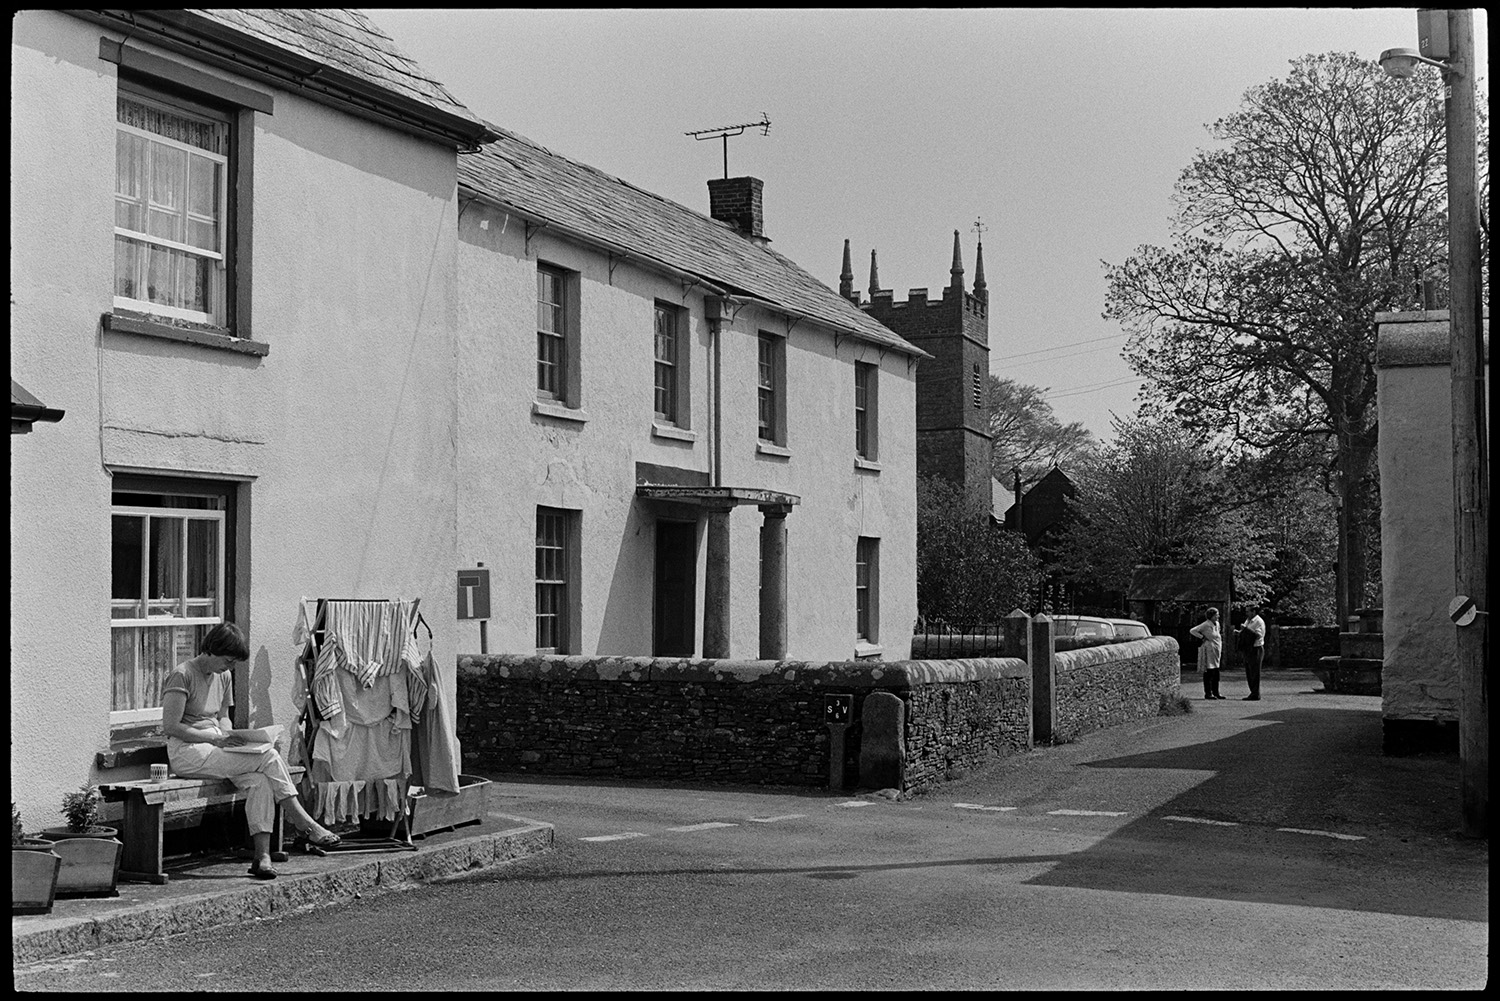 Street scenes, house with porch, thatched farmhouse and door, people chatting, church tower. 
[A woman sat on a bench next to a clothes airer drying washing, outside a house in Northlew. A house with a porch held up by pillars and the church tower can be seen in the background, along with two people talking in the street.]